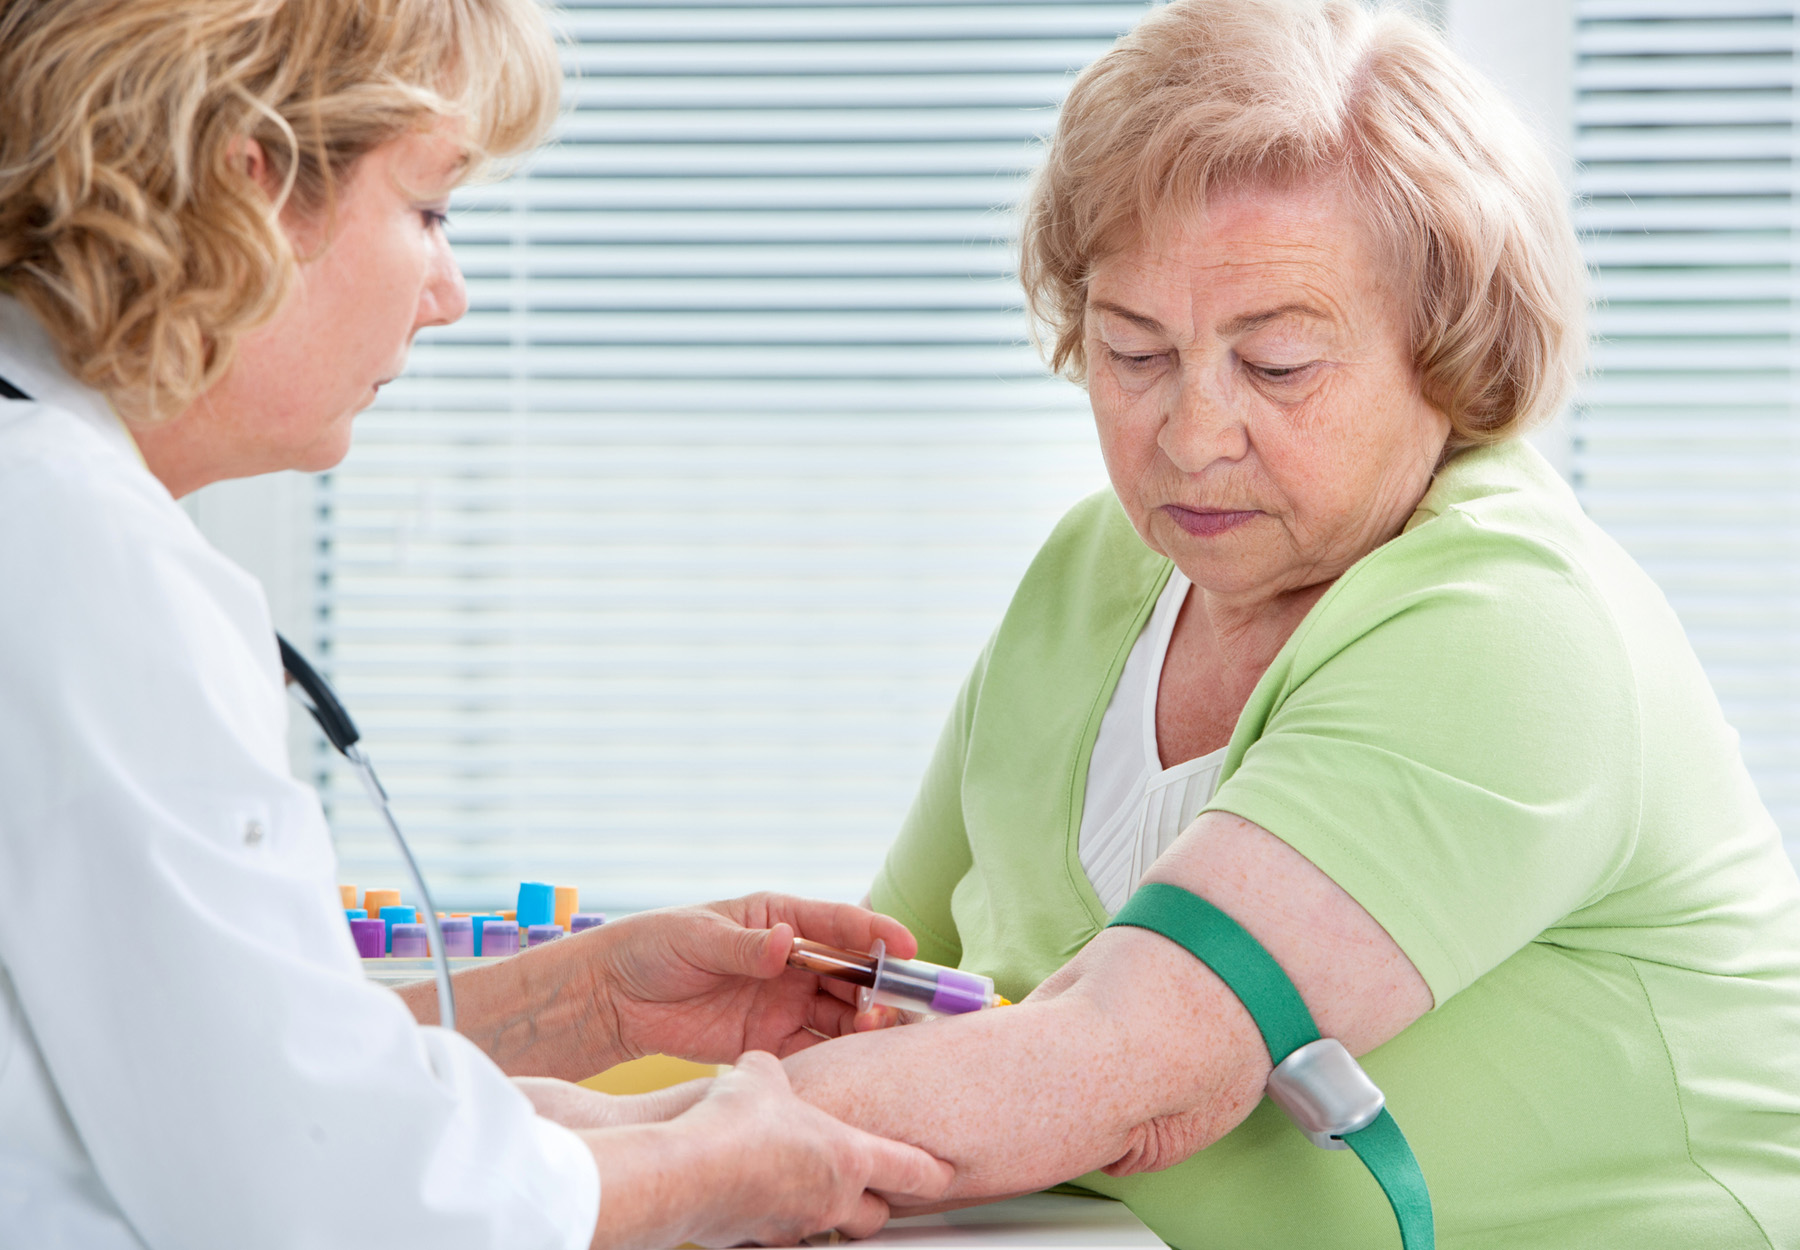 Elderly woman getting a blood test. Stock photo.